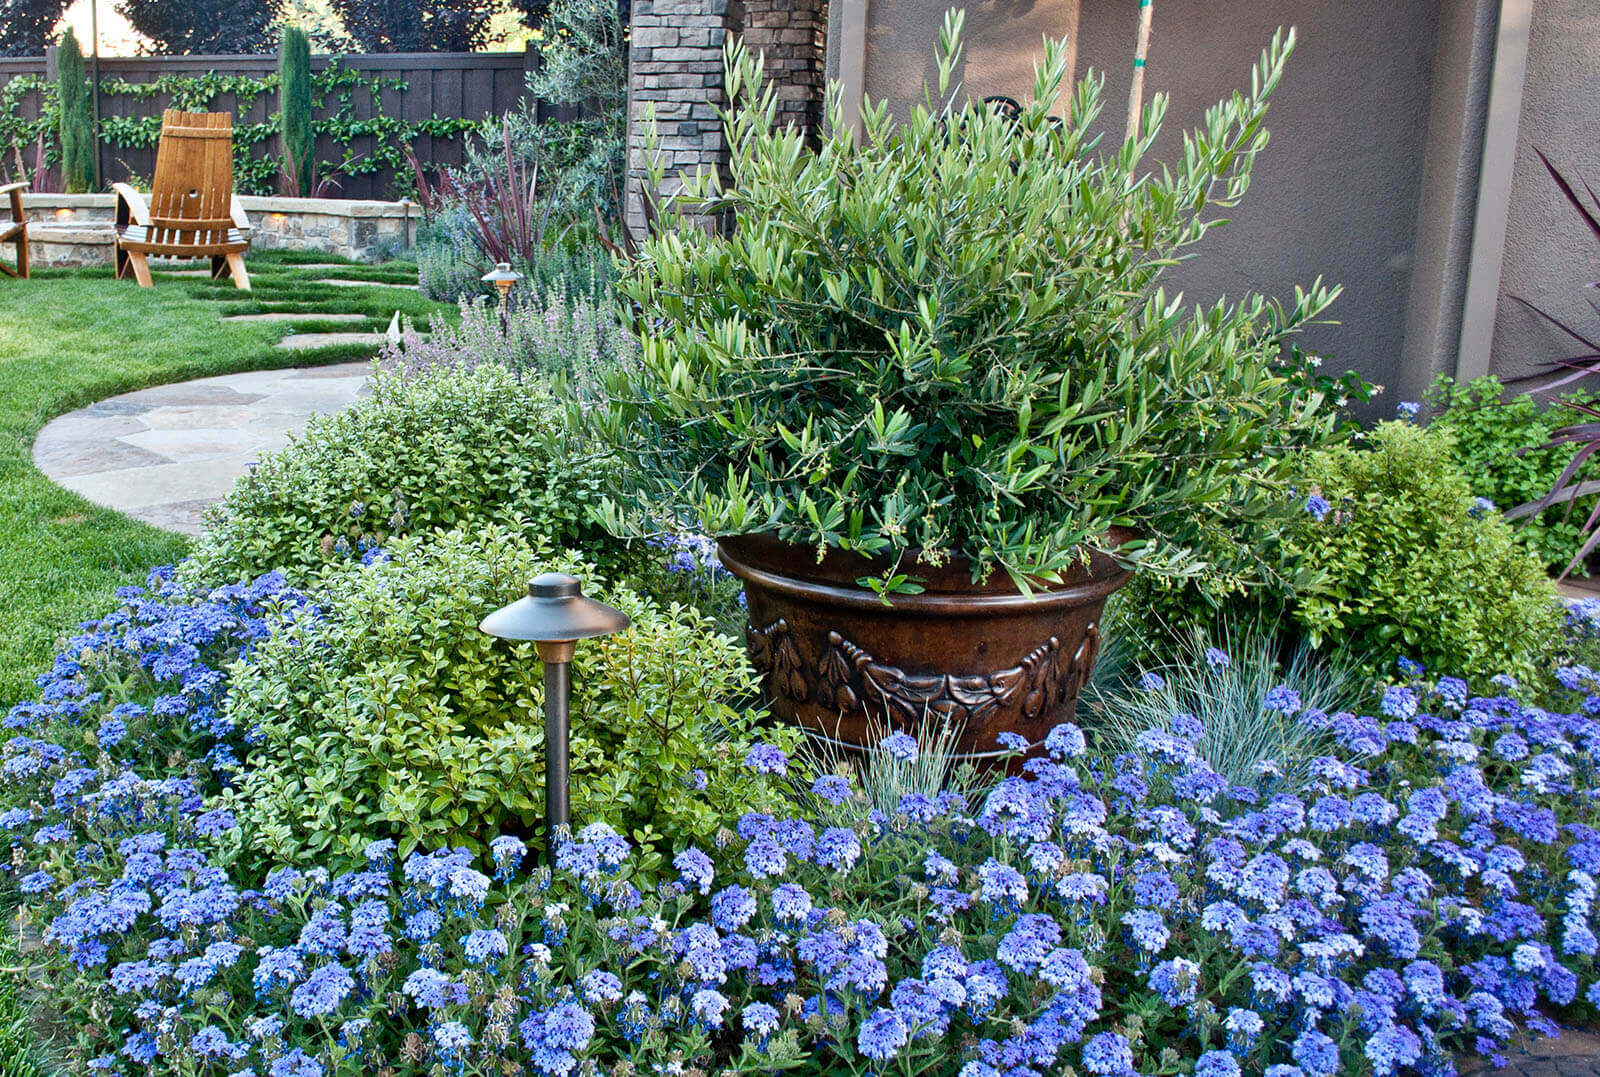 Accented ceramic pot among clustered blue flowers and greenery